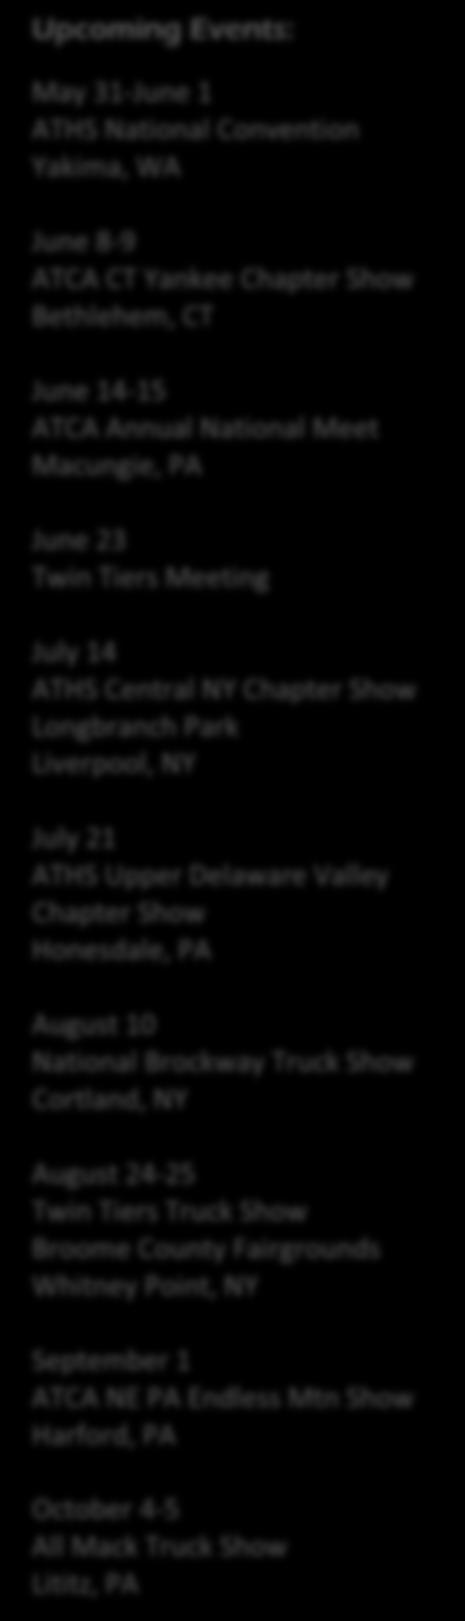 Chapter Show Bethlehem, CT June 14-15 ATCA Annual National Meet Macungie, PA June 23 Twin Tiers Meeting July 14 ATHS Central NY Chapter Show Longbranch Park Liverpool, NY July 21 ATHS Upper Delaware